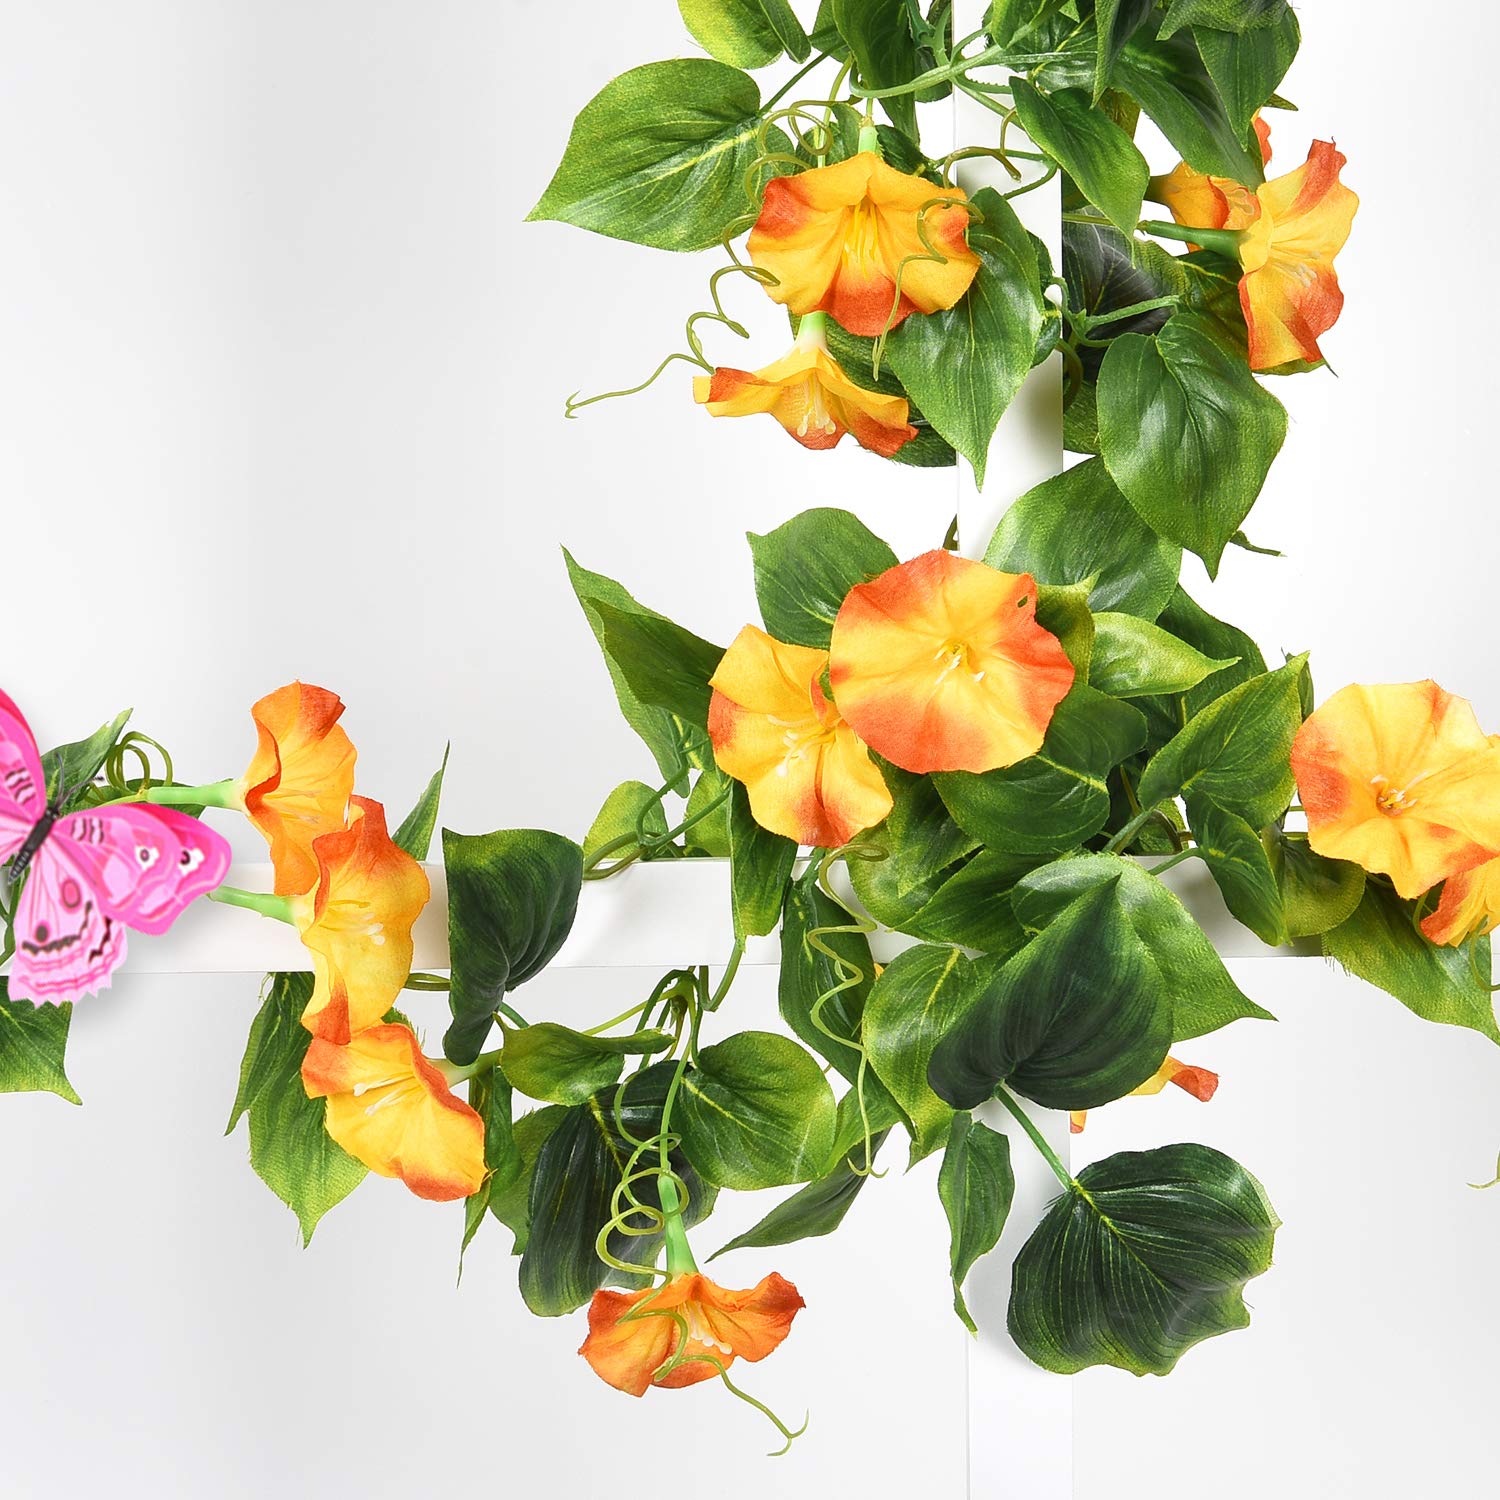 Dolicer Artificial Morning Glory Flower Vines 2pcs 15Feet Morning Glory Hanging Green Plants Silk Garland Greenery Garland Morning Glory for Wedding Garden Wall Fence Home Decor Yellow-Orange